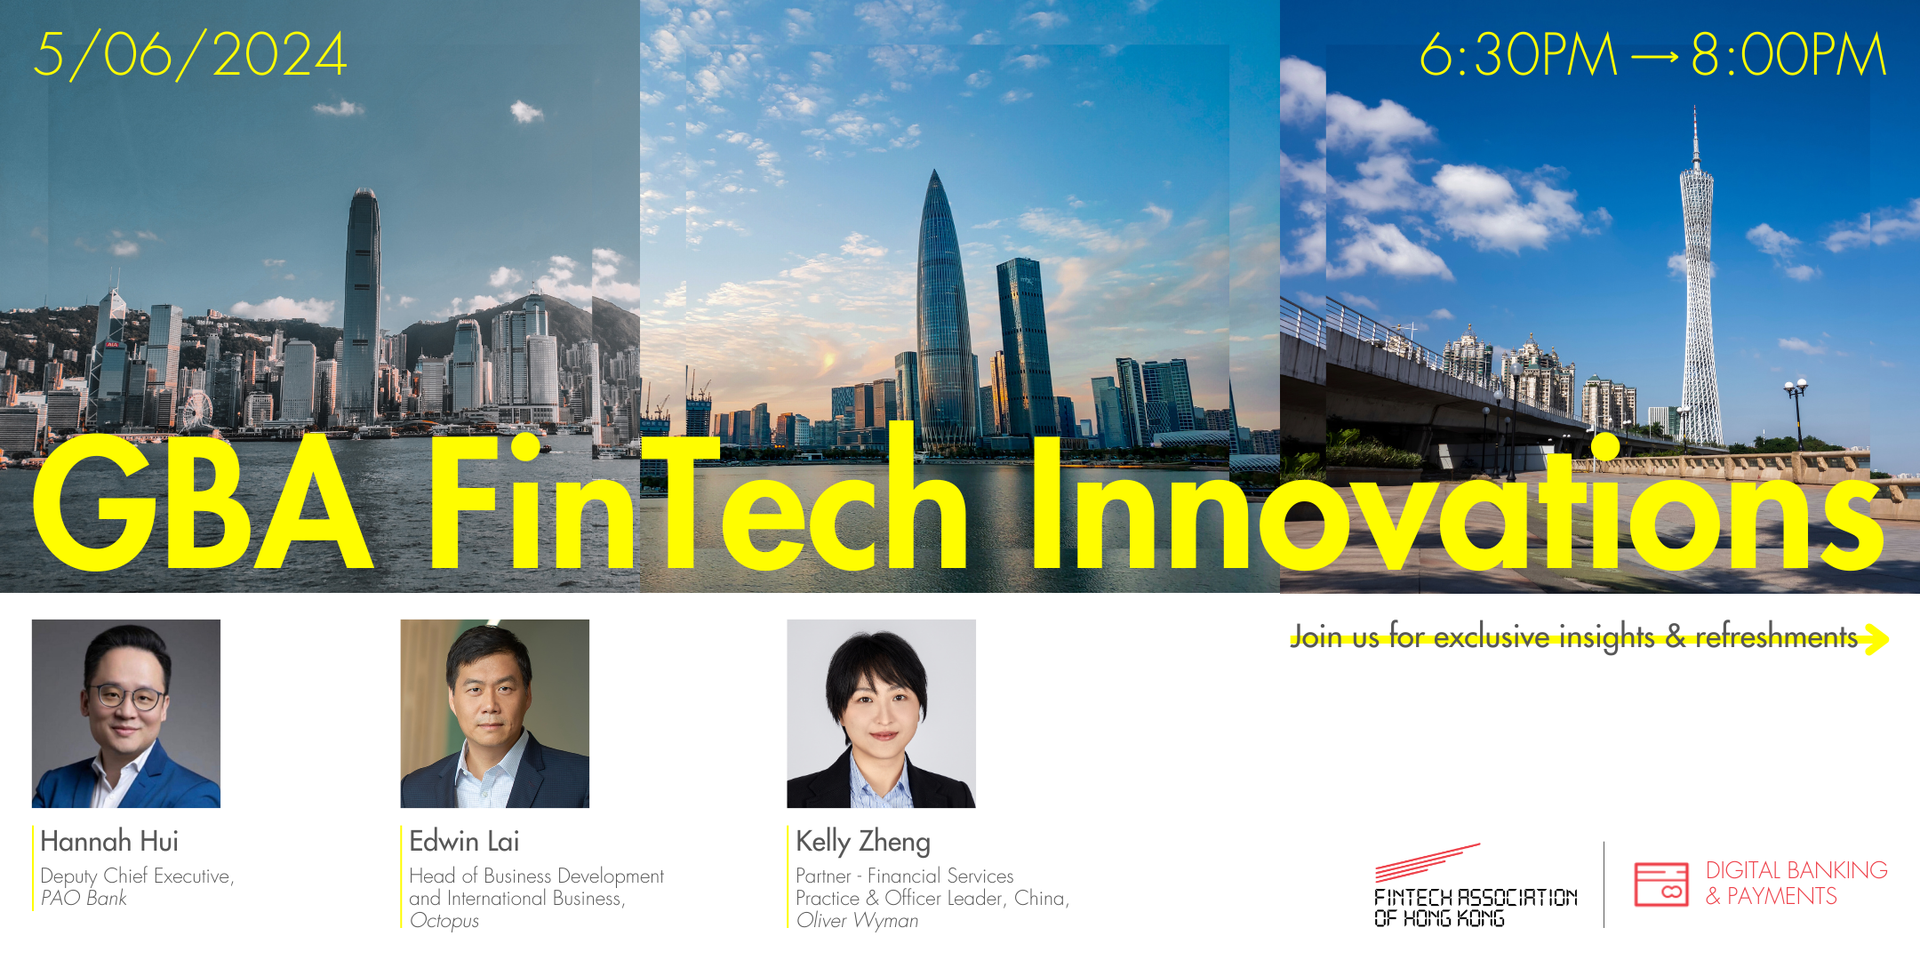 thumbnails FTAHK Digital Banking & Payments: GBA FinTech Innovations